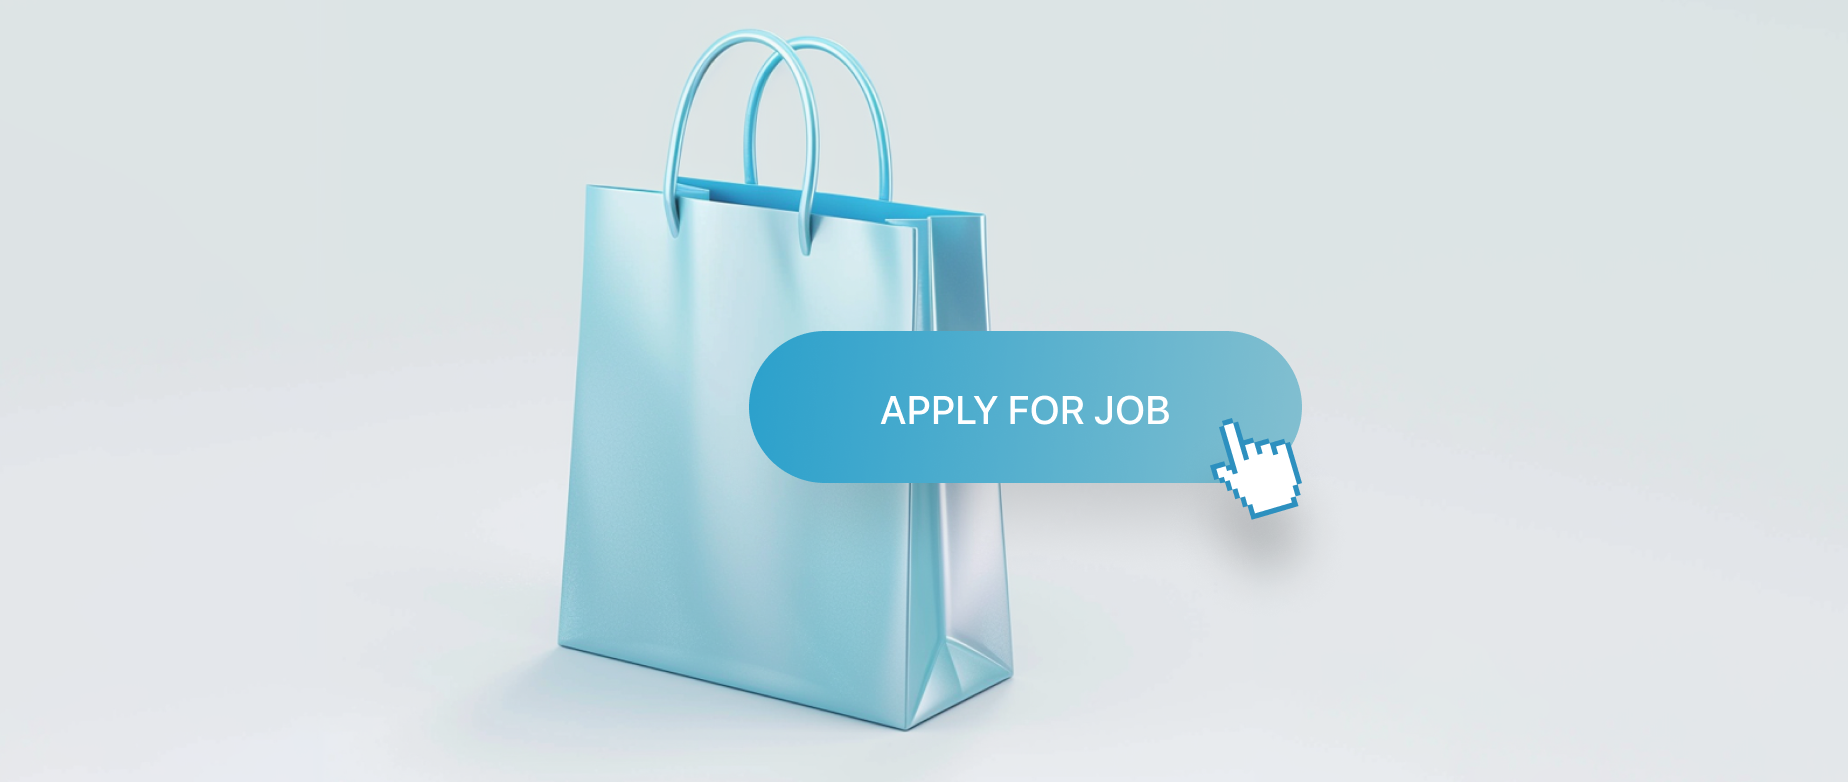 A blue shopping bag with a cursor selecting a button to APPLY FOR JOB